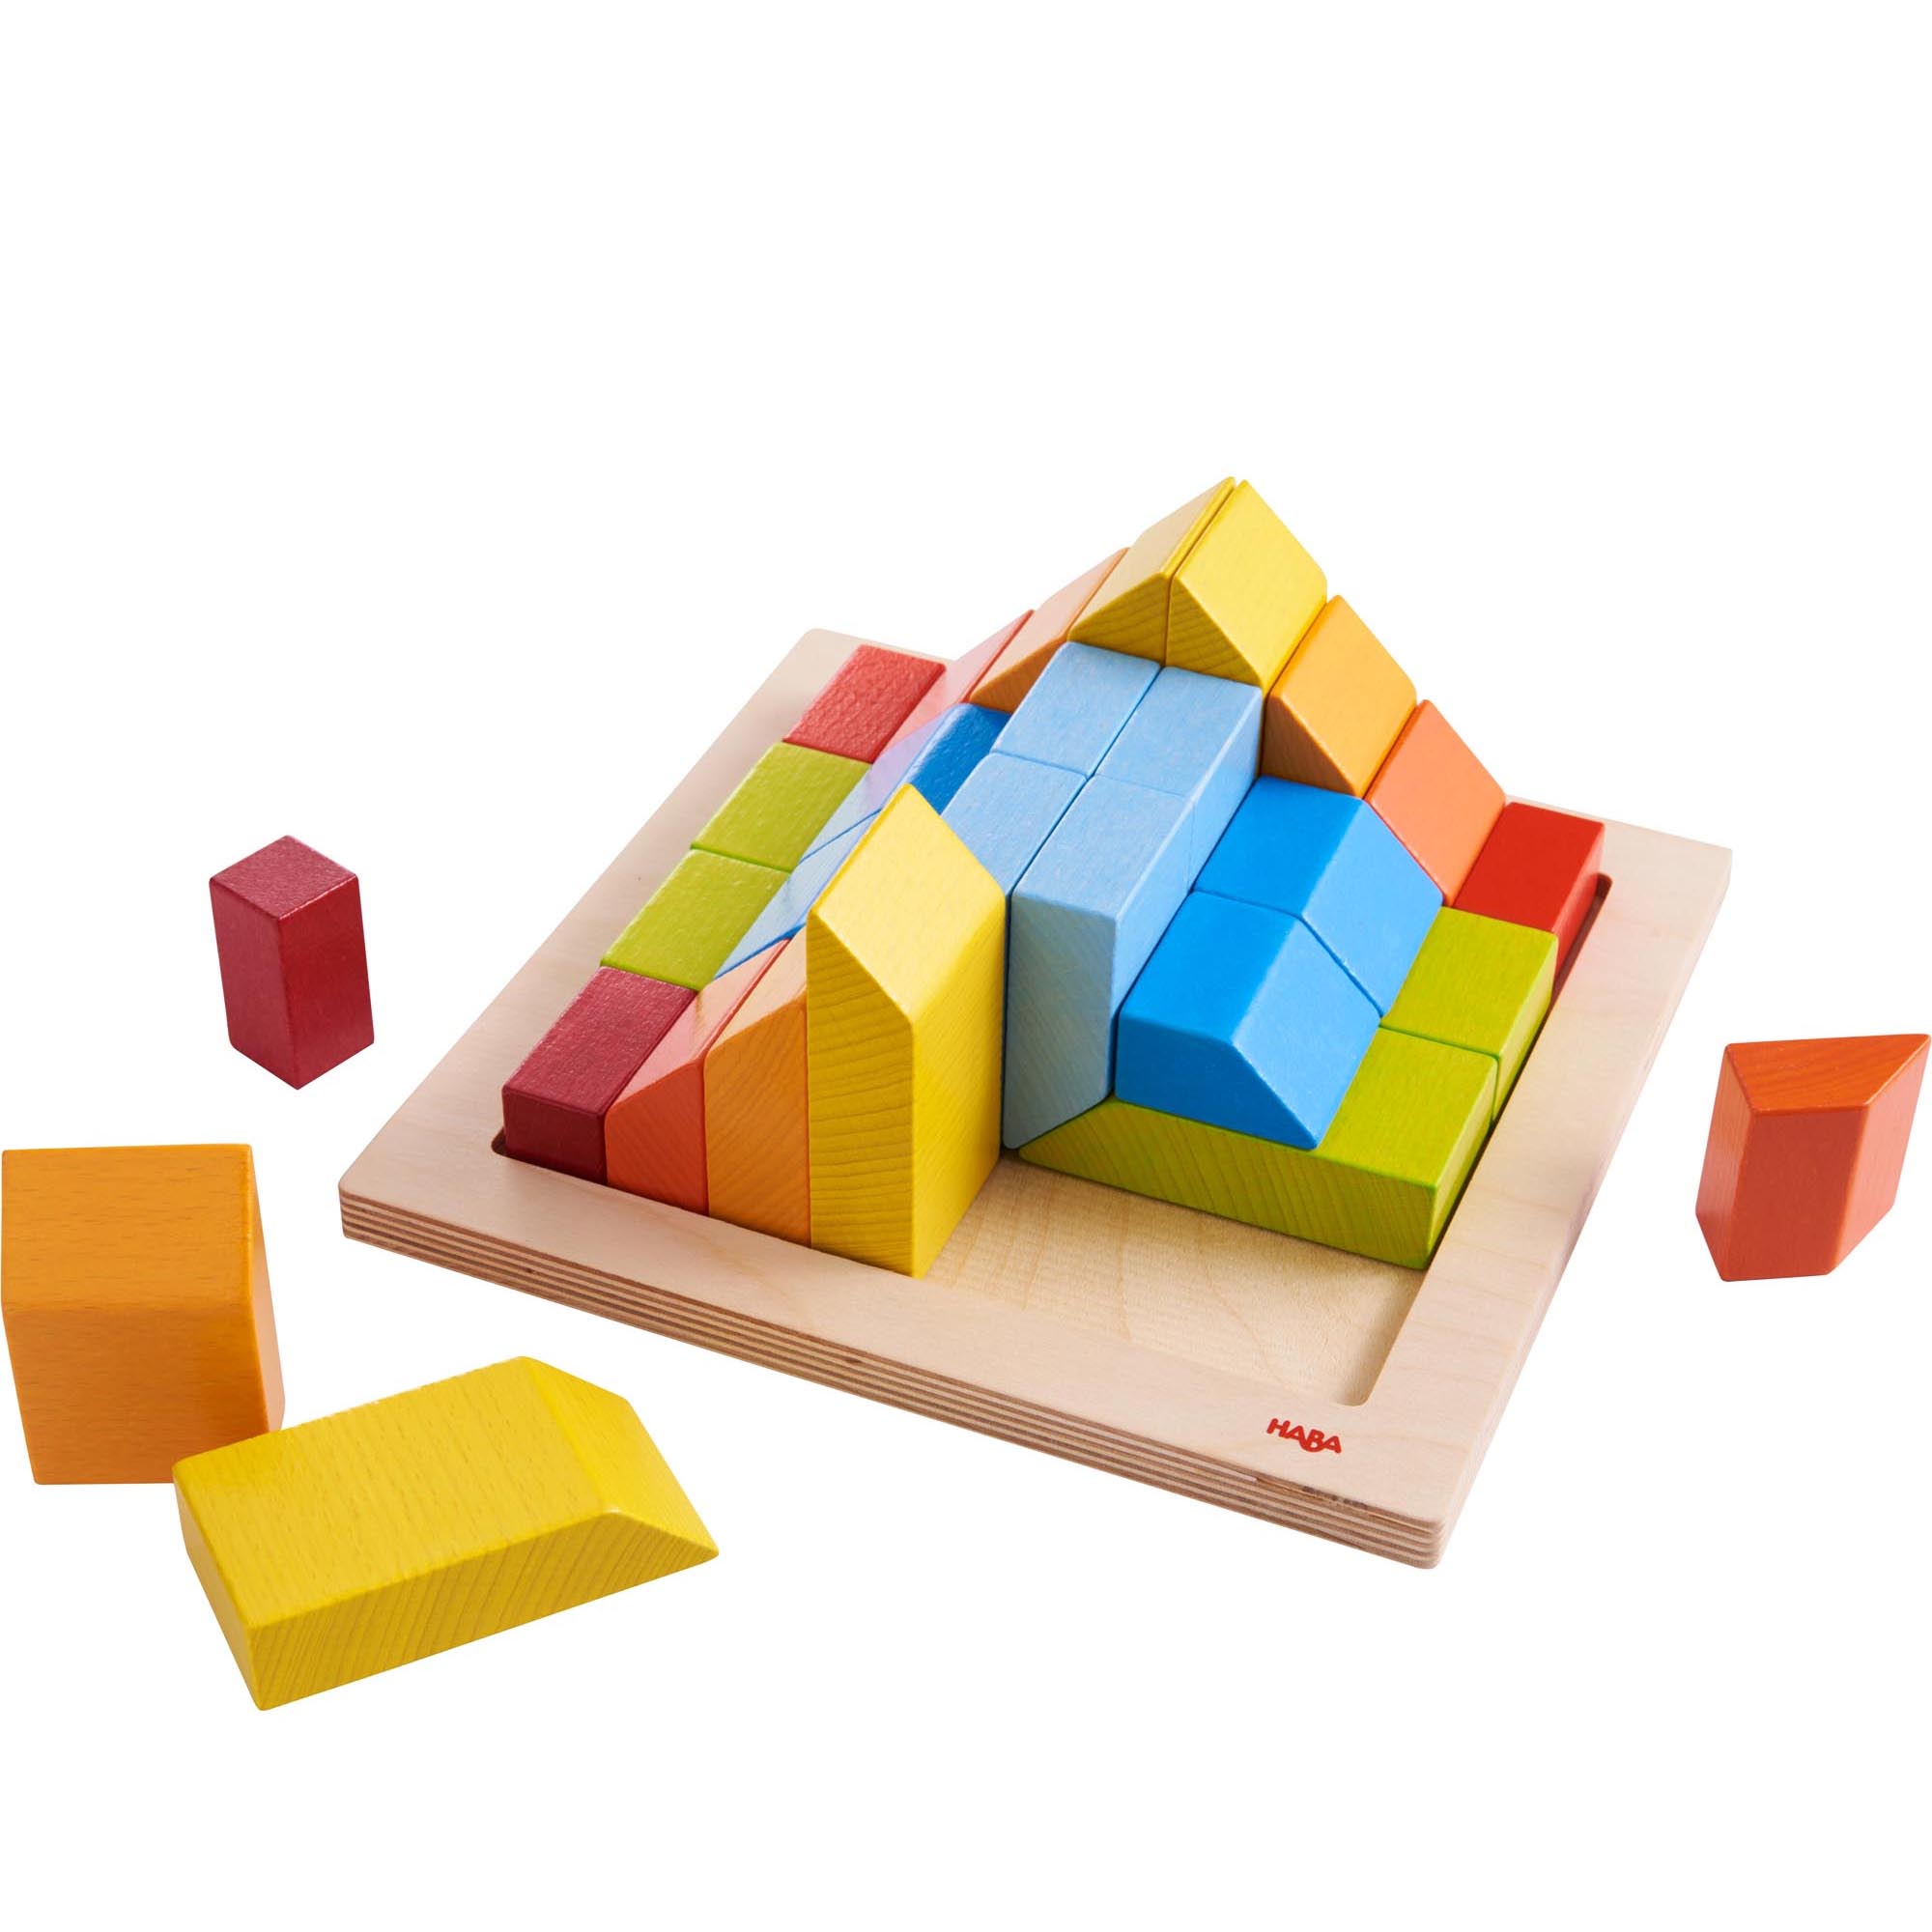 HABA 3D Arranging Game Creative Stones with 28 Wooden Blocks - image 1 of 11